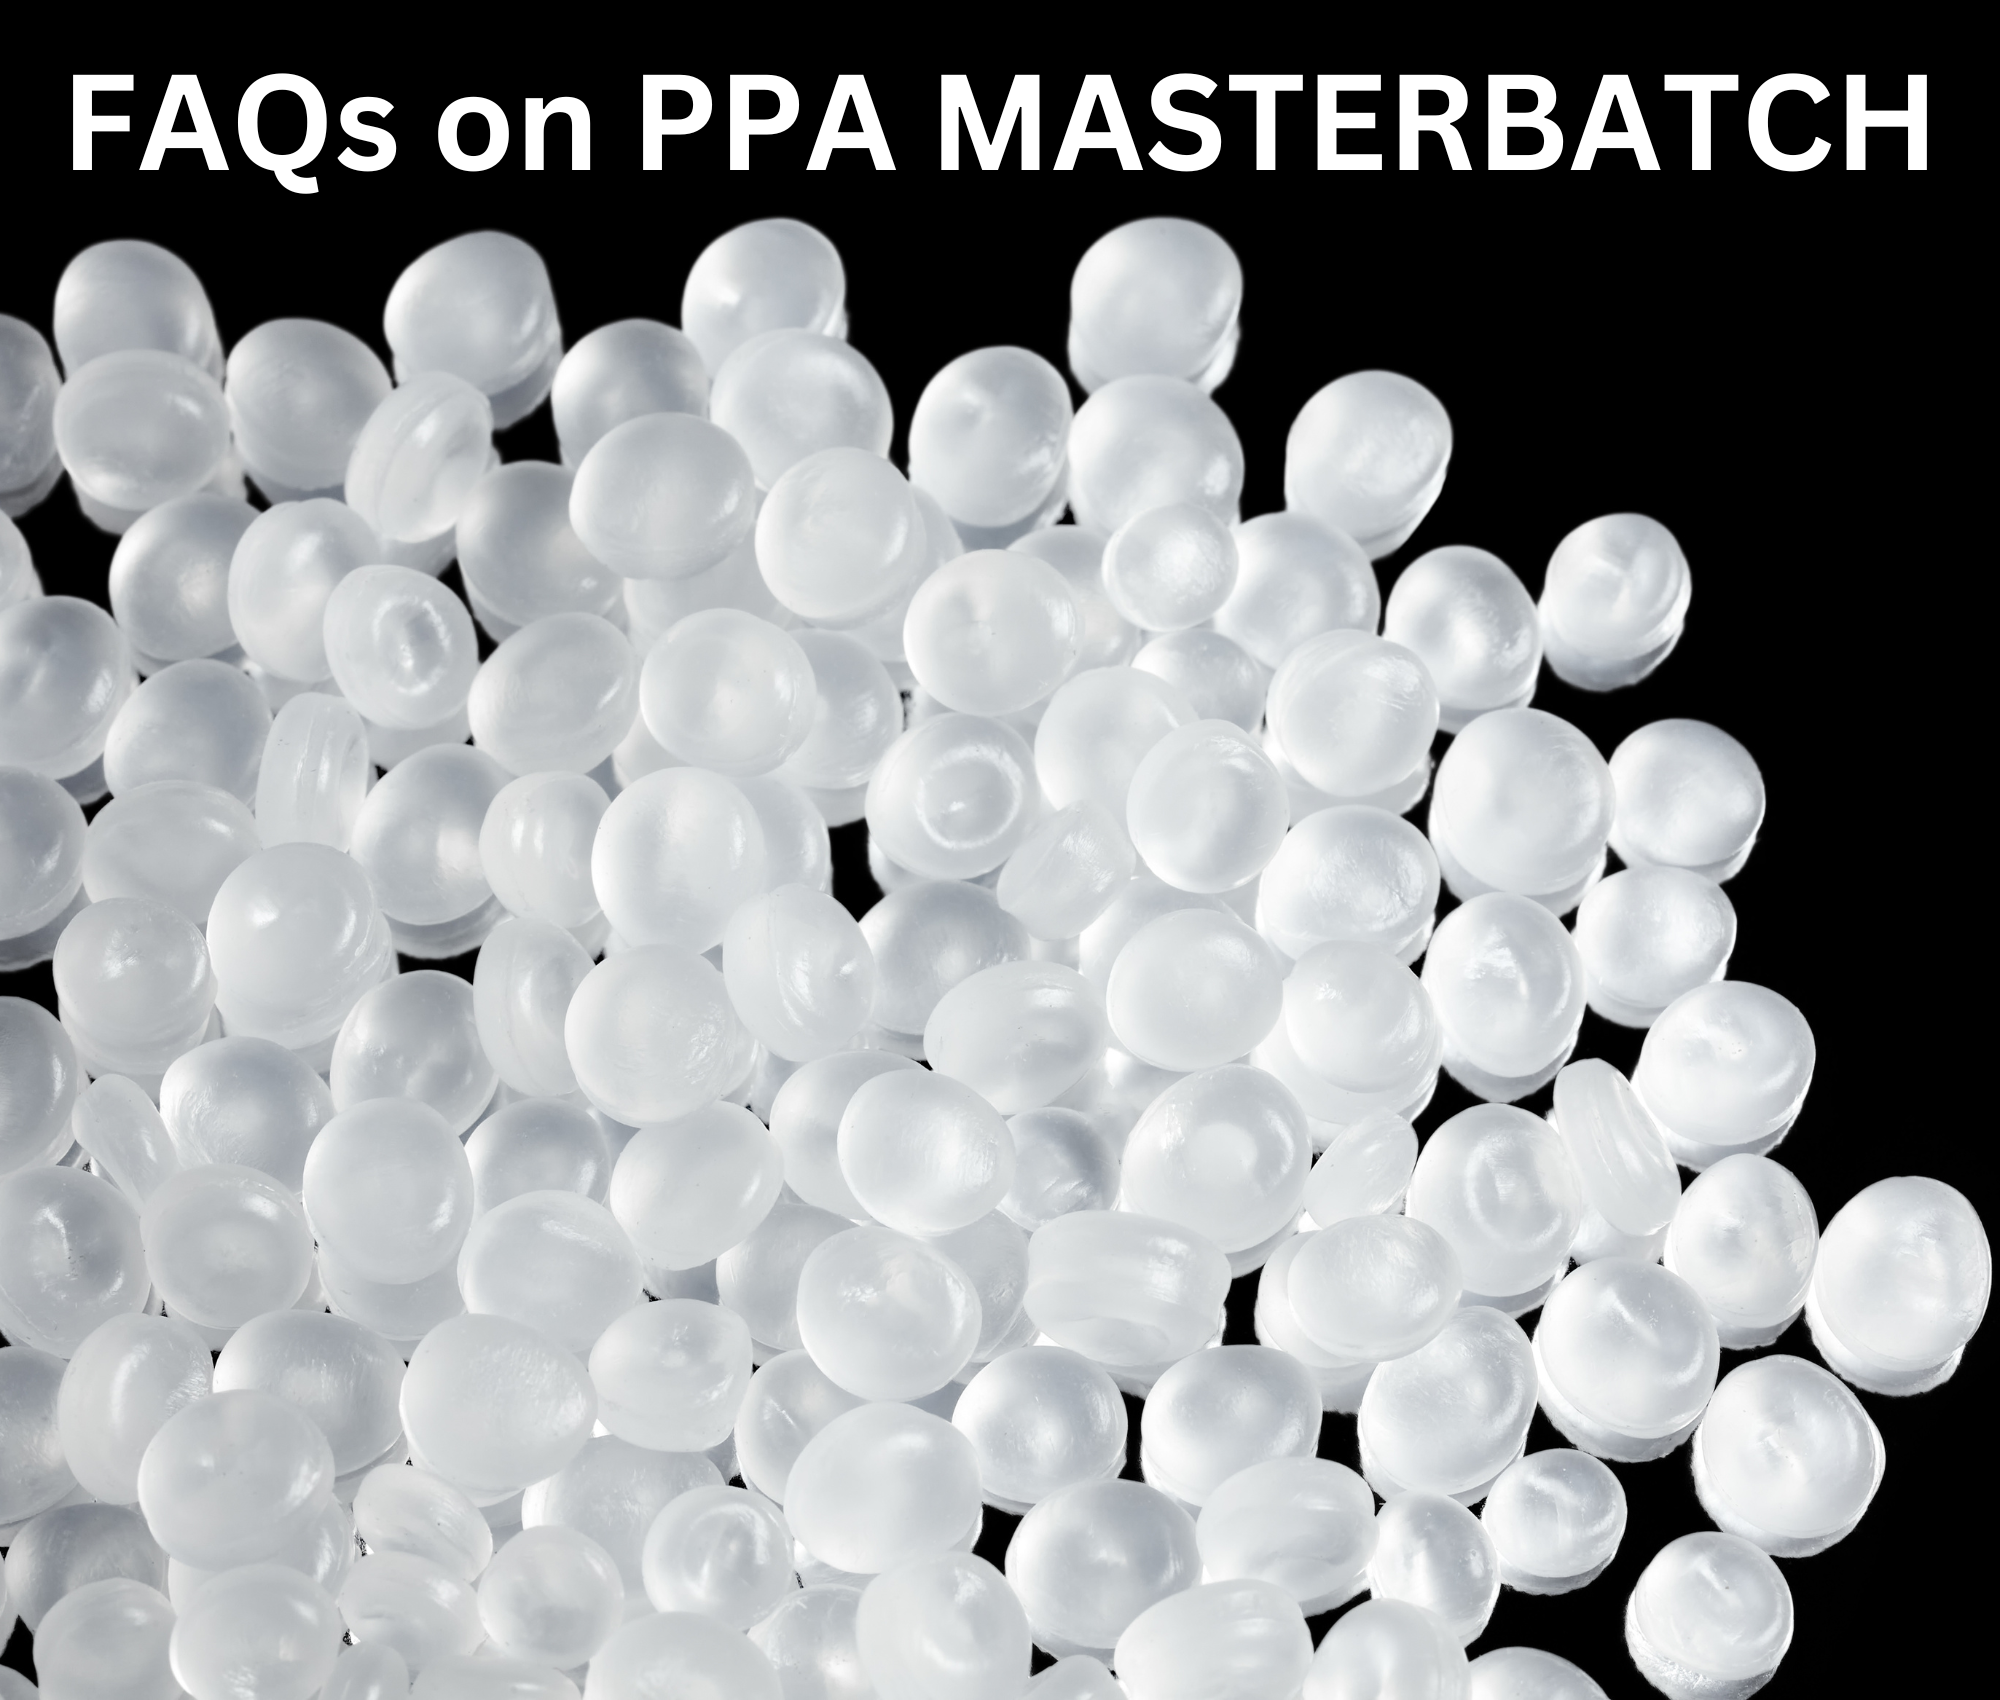 PPA Masterbatch with Text in White with Black Background